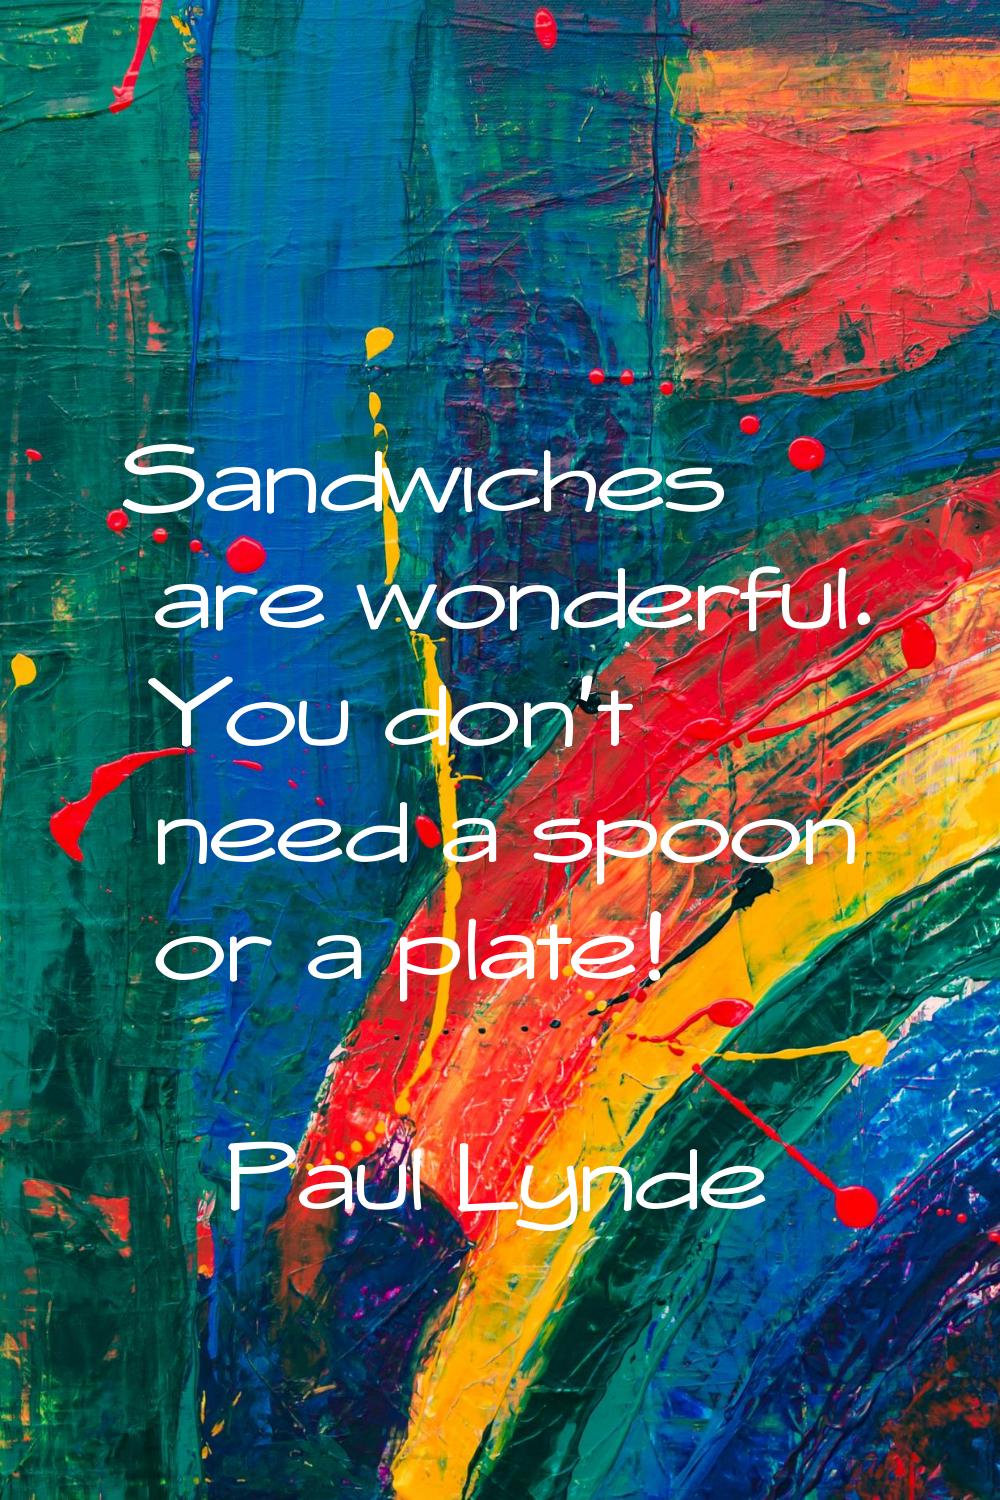 Sandwiches are wonderful. You don't need a spoon or a plate!